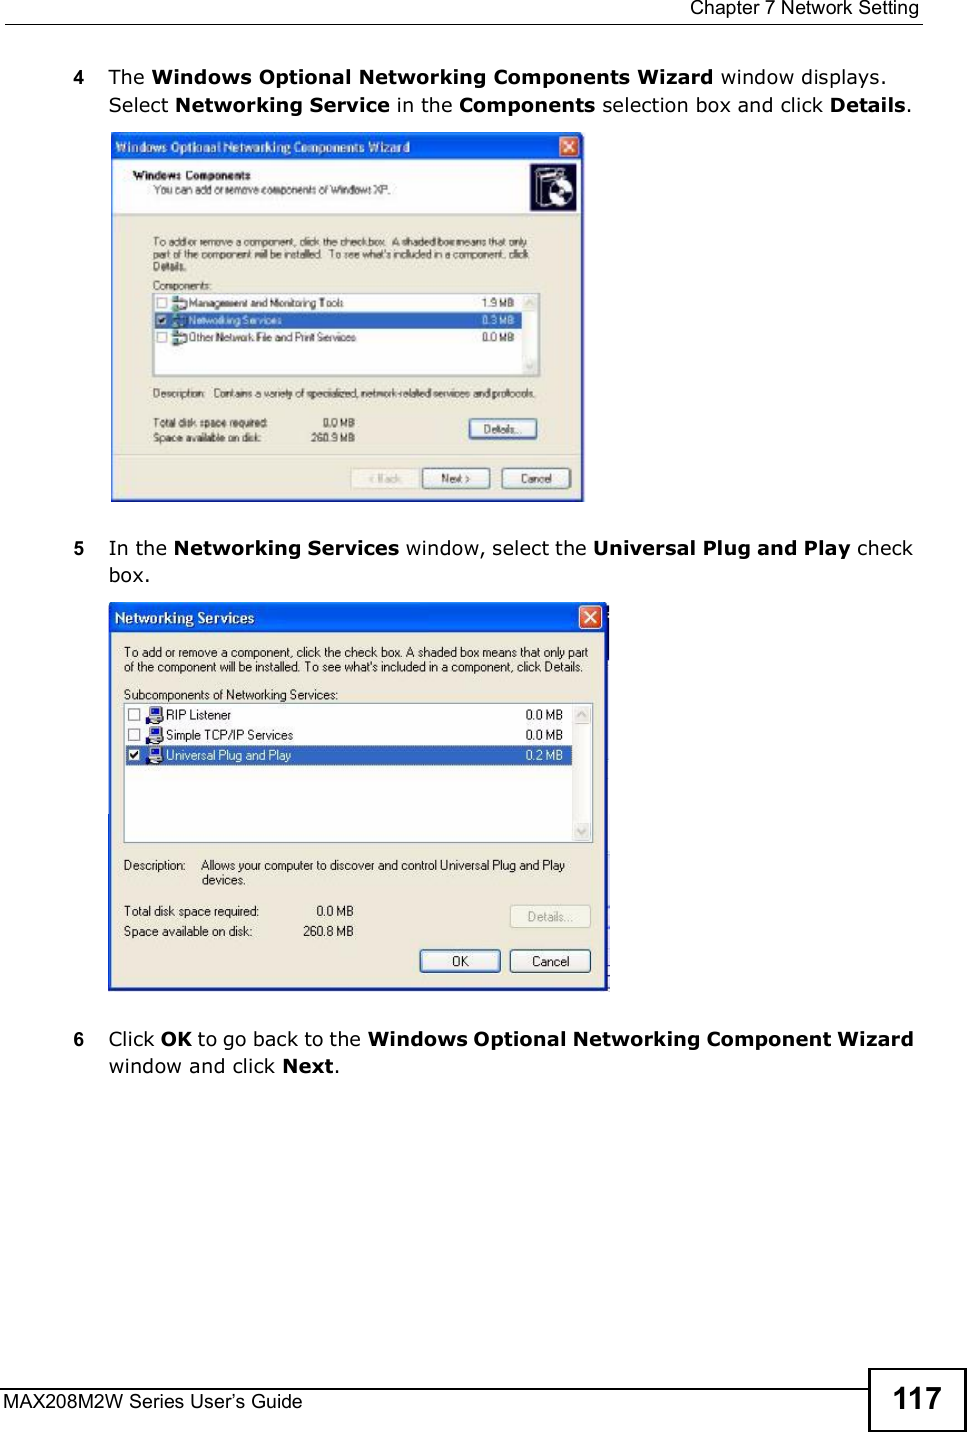  Chapter 7Network SettingMAX208M2W Series User s Guide 1174The Windows Optional Networking Components Wizard window displays. Select Networking Service in the Components selection box and click Details. 5In the Networking Services window, select the Universal Plug and Play check box. 6Click OK to go back to the Windows Optional Networking Component Wizard window and click Next. 